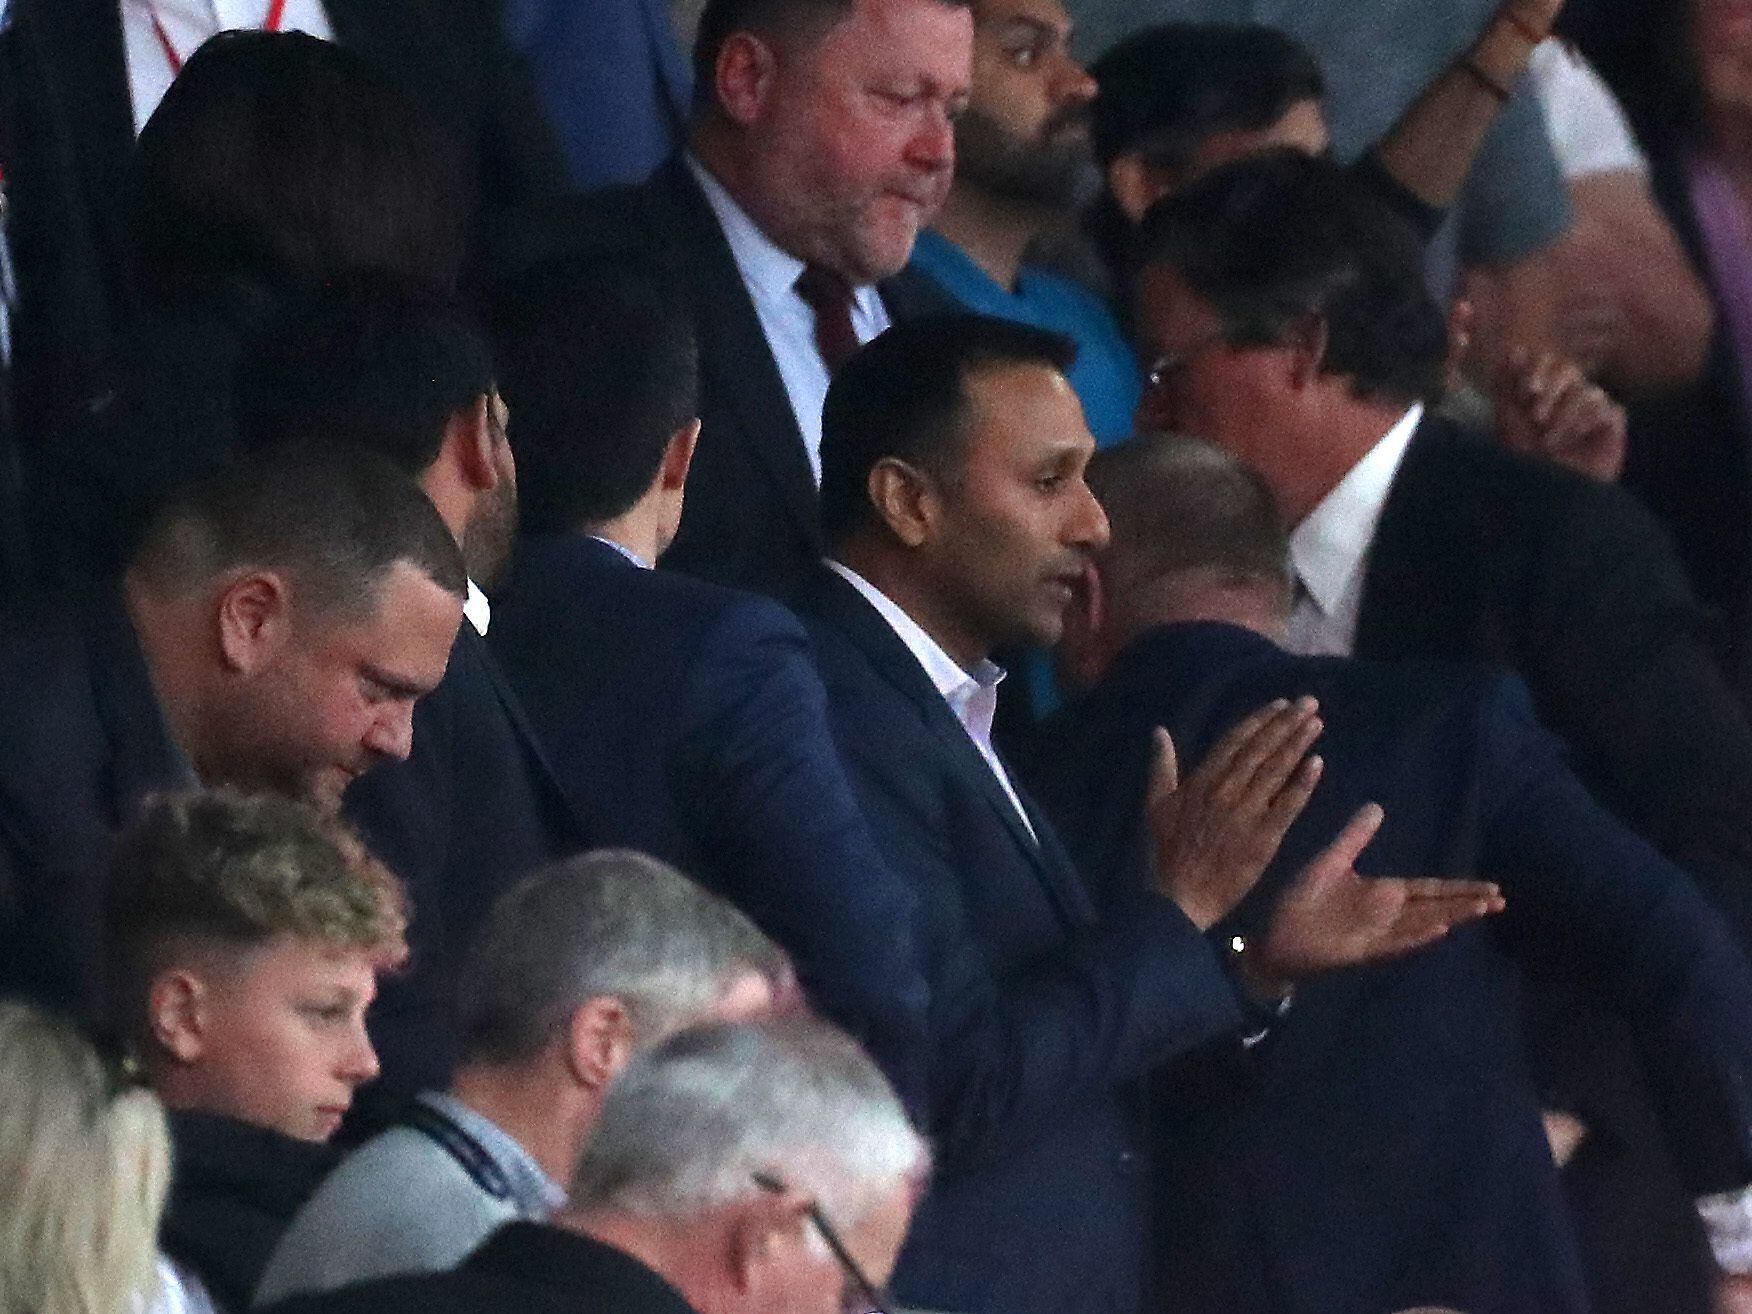 Why Shilen Patel brings comfort to West Brom fans after play-off heartbreak